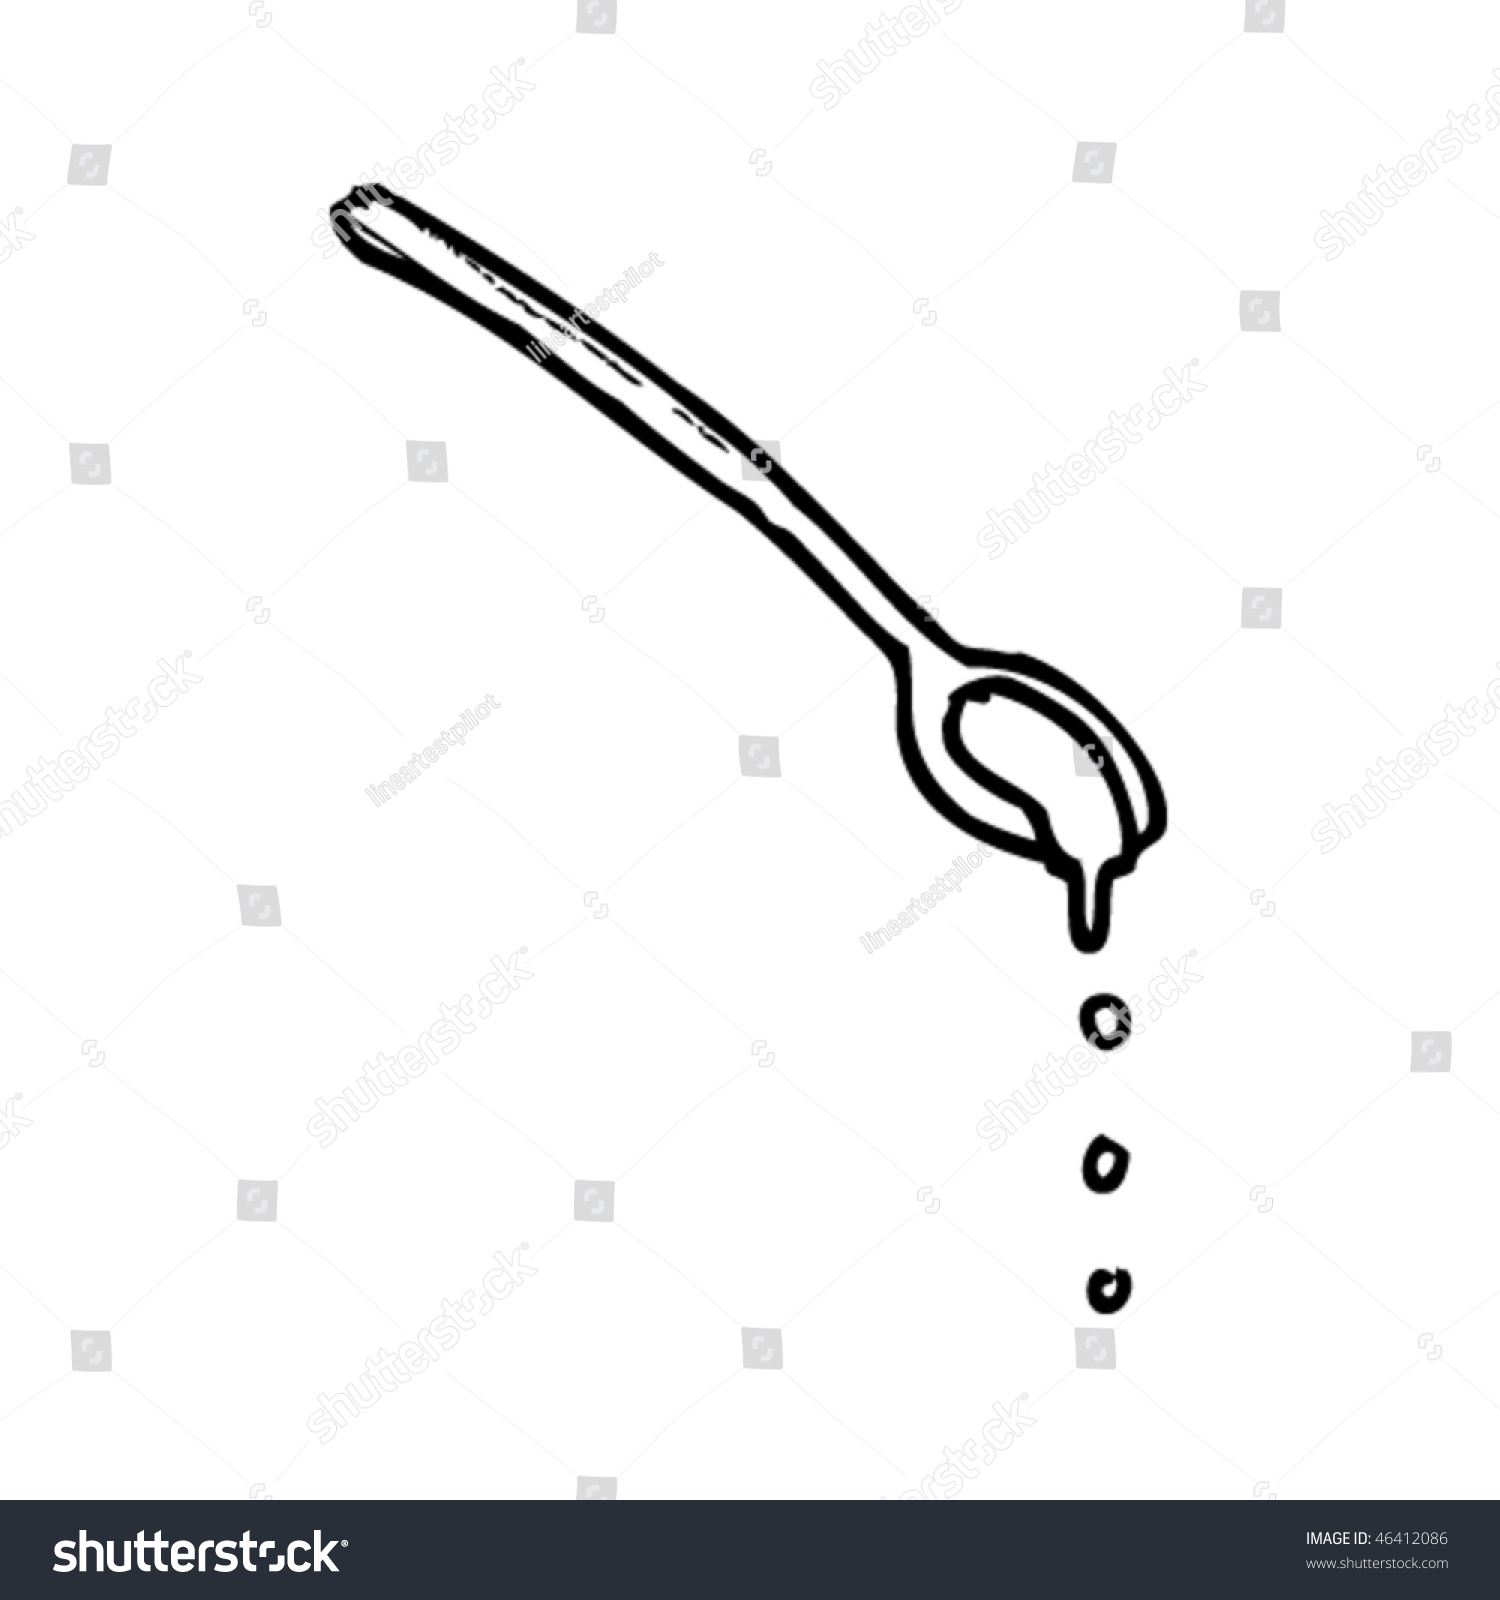 Quick Drawing Of A Spoon Stock Vector Illustration 46412086 : Shutterstock